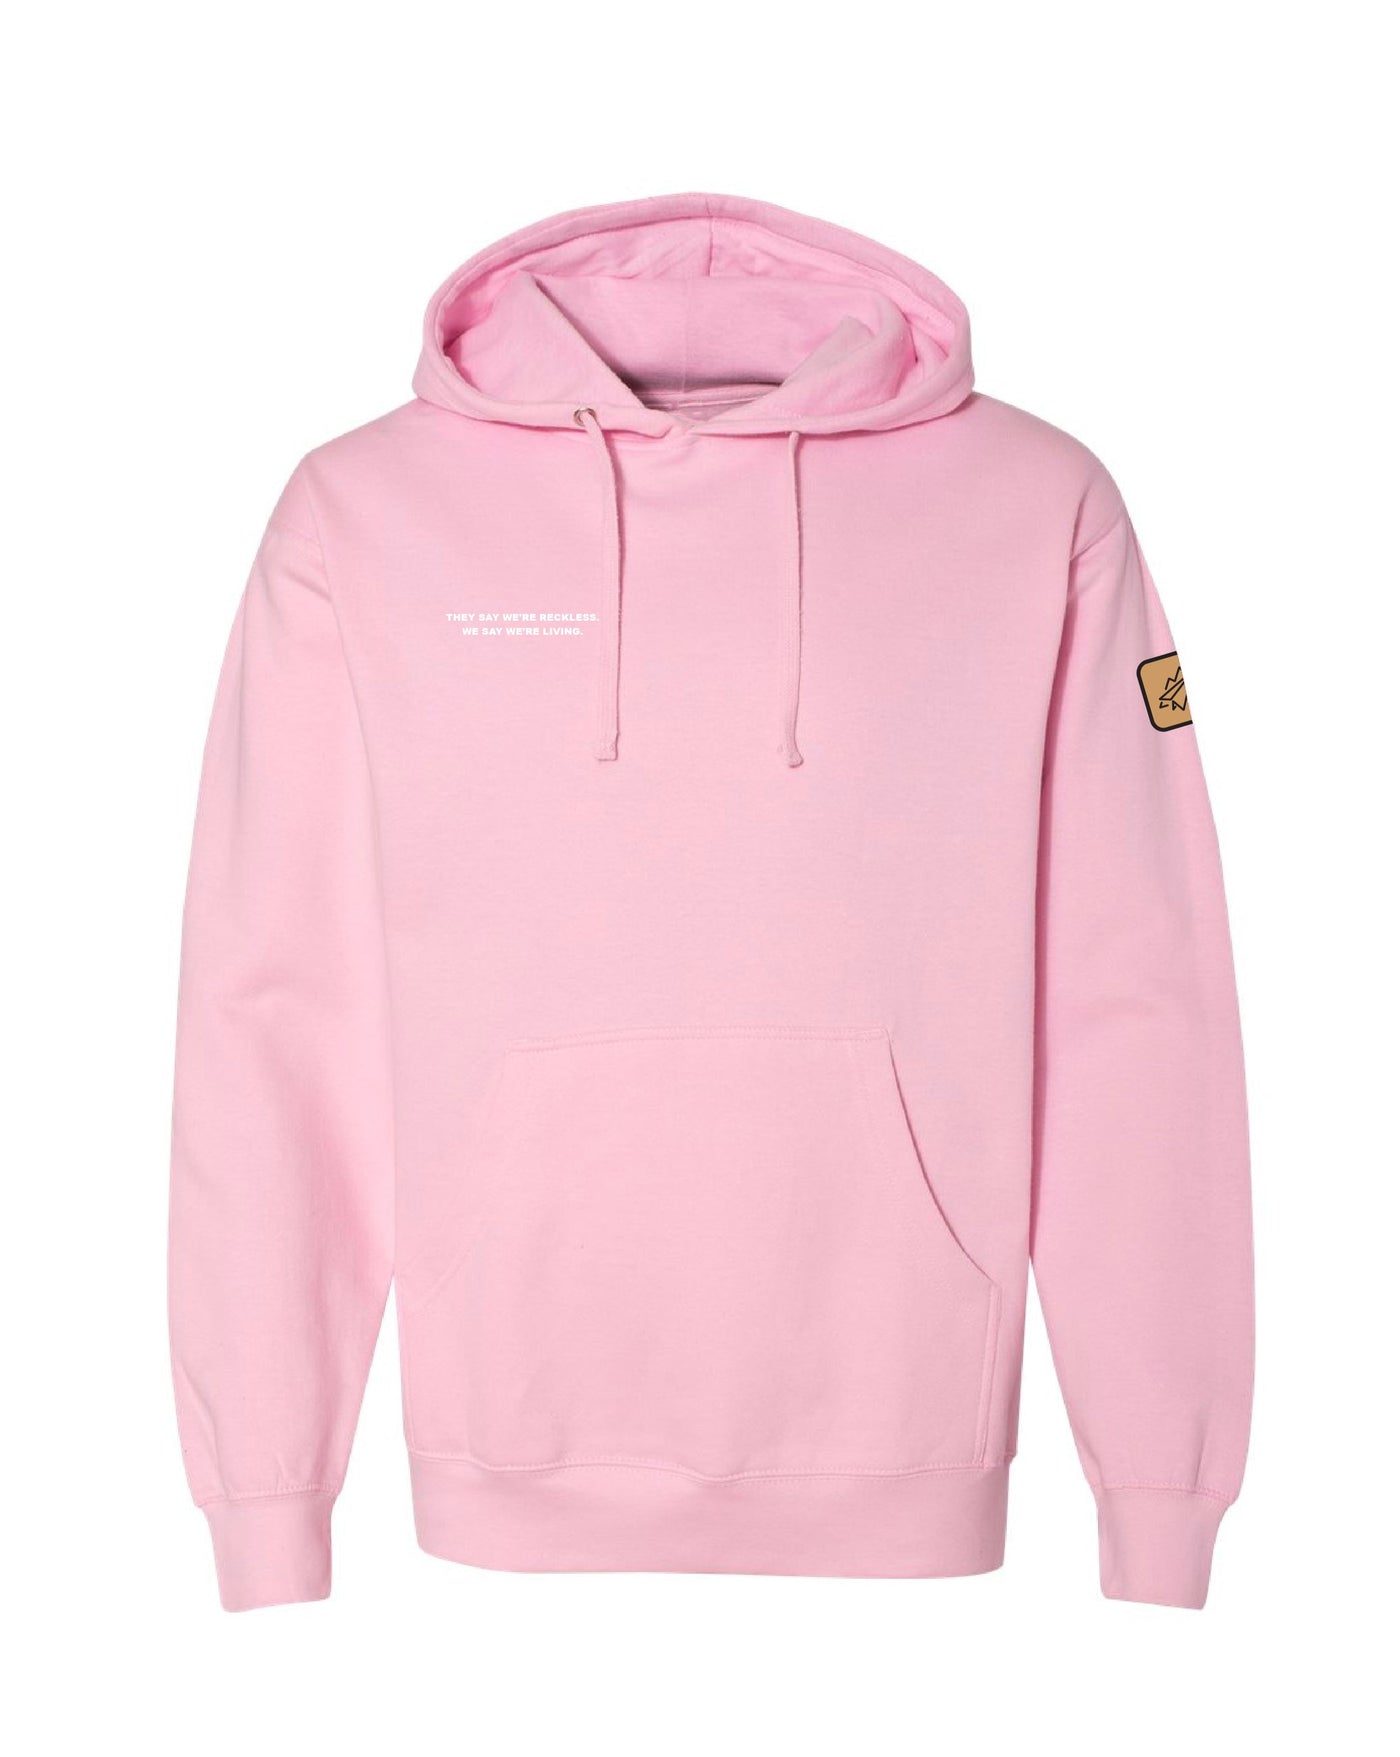 "They Say" Hoodie - Pink